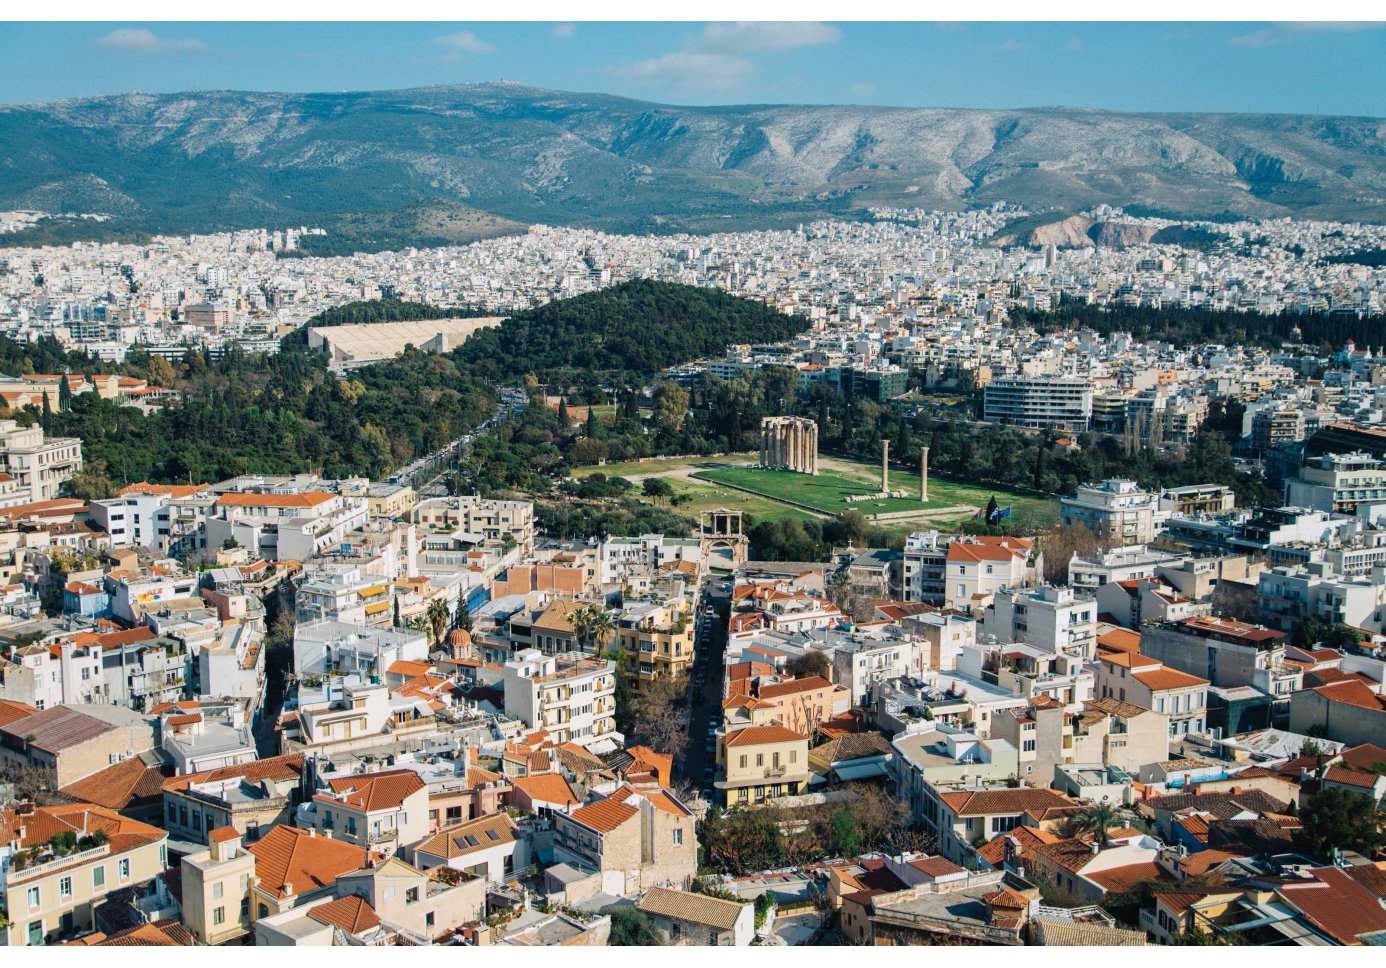 A panoramic view of Athens highlighting the Temple of Olympian Zeus